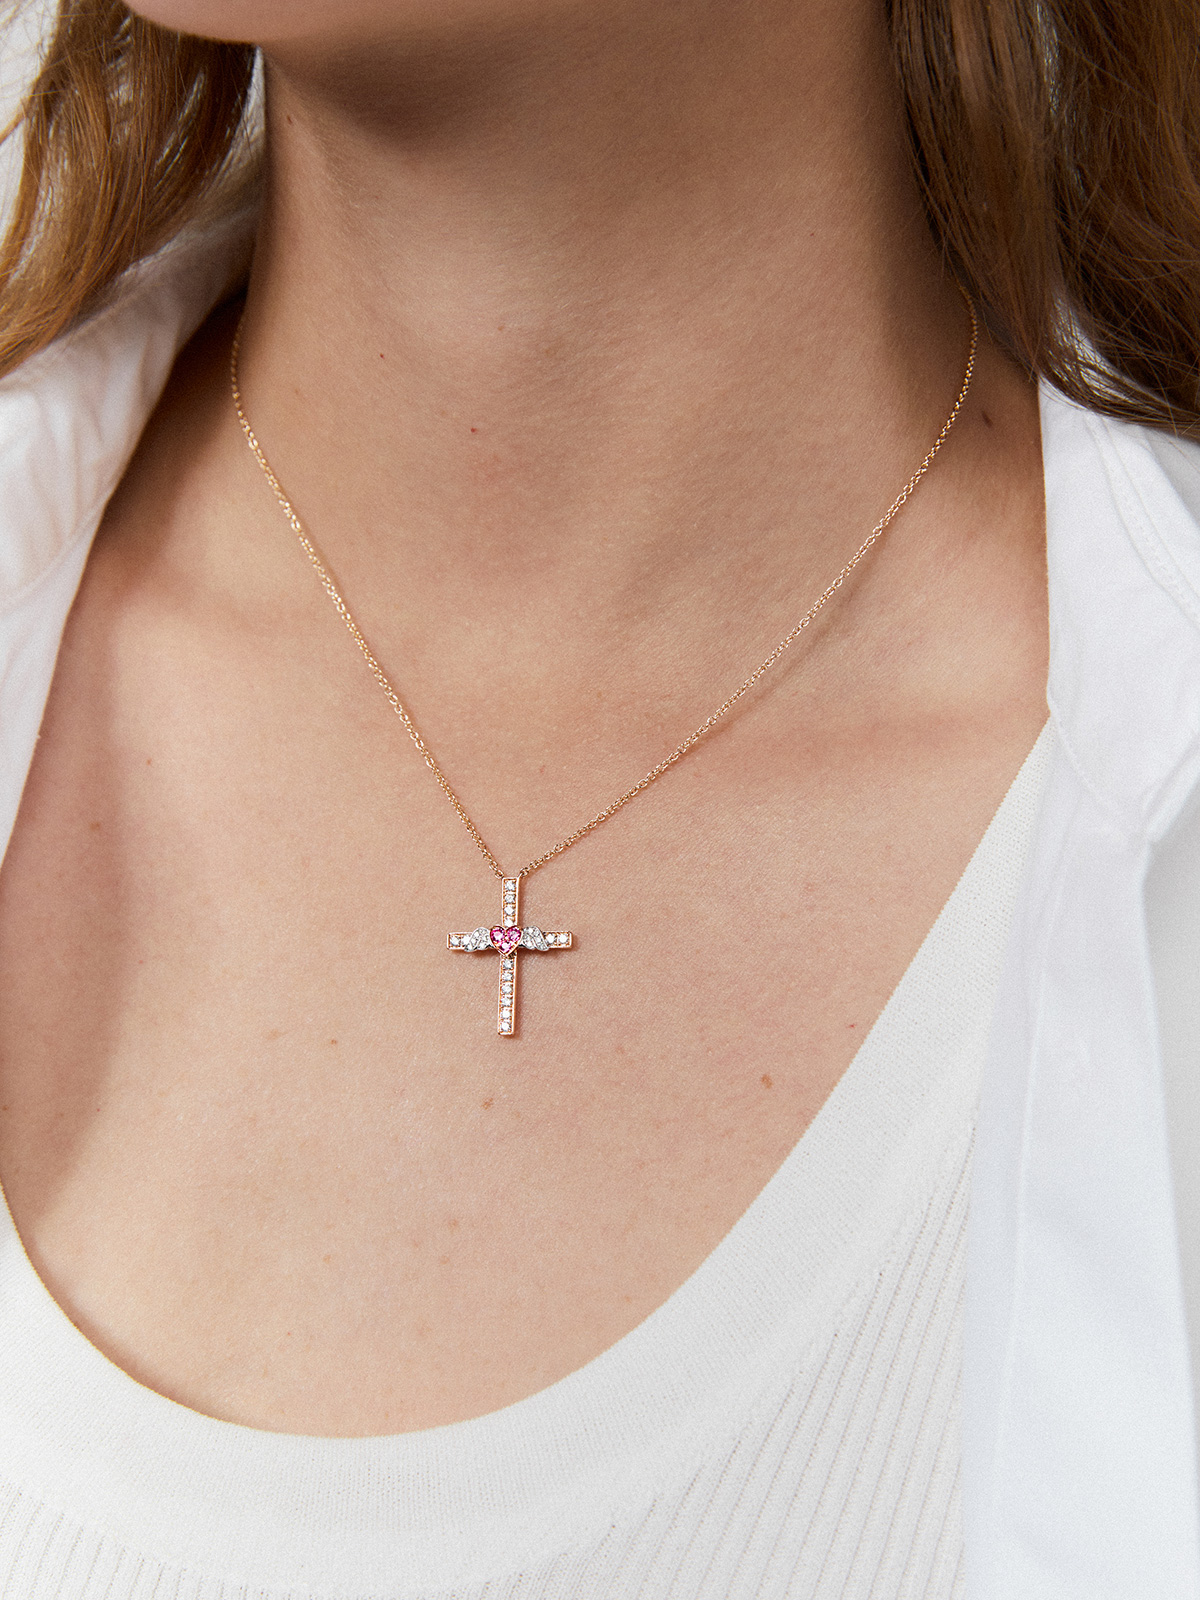 Cross and heart pendant with wings made of 18kt rose gold, adorned with diamonds and pink sapphires.